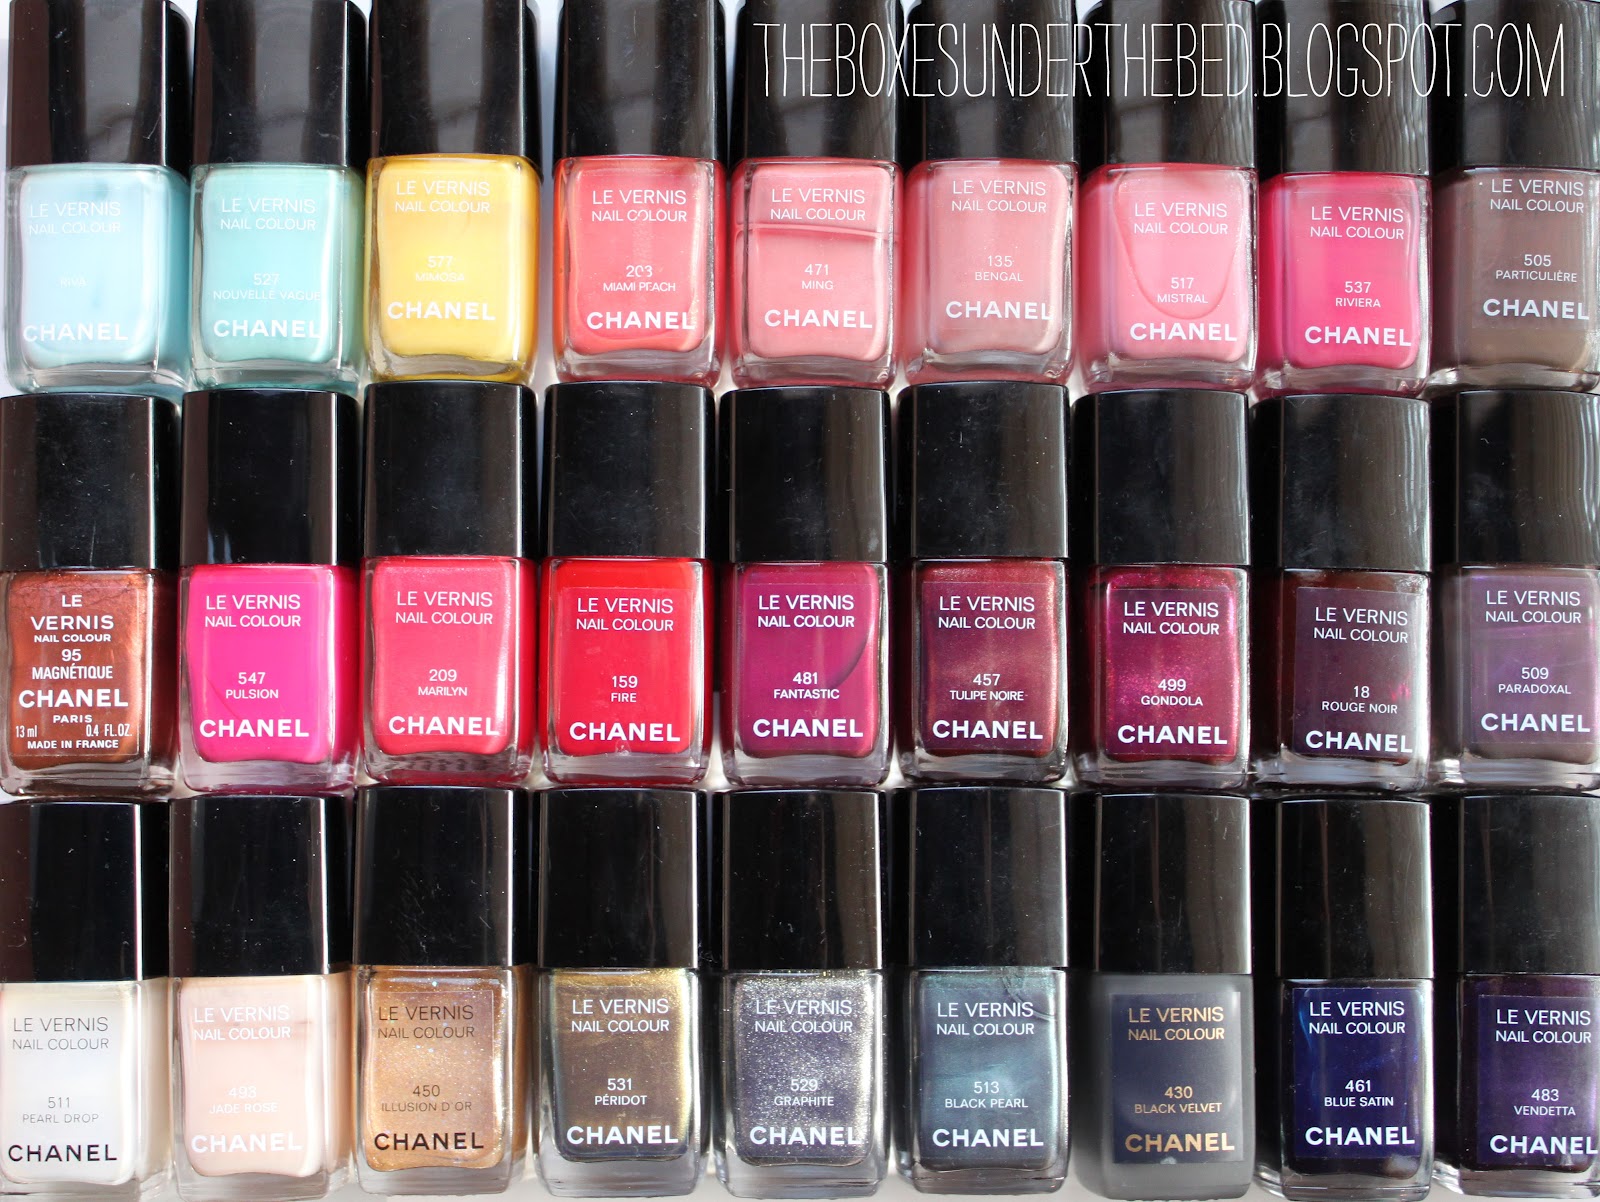 The boxes under the bed: Chanel Le Vernis Collection